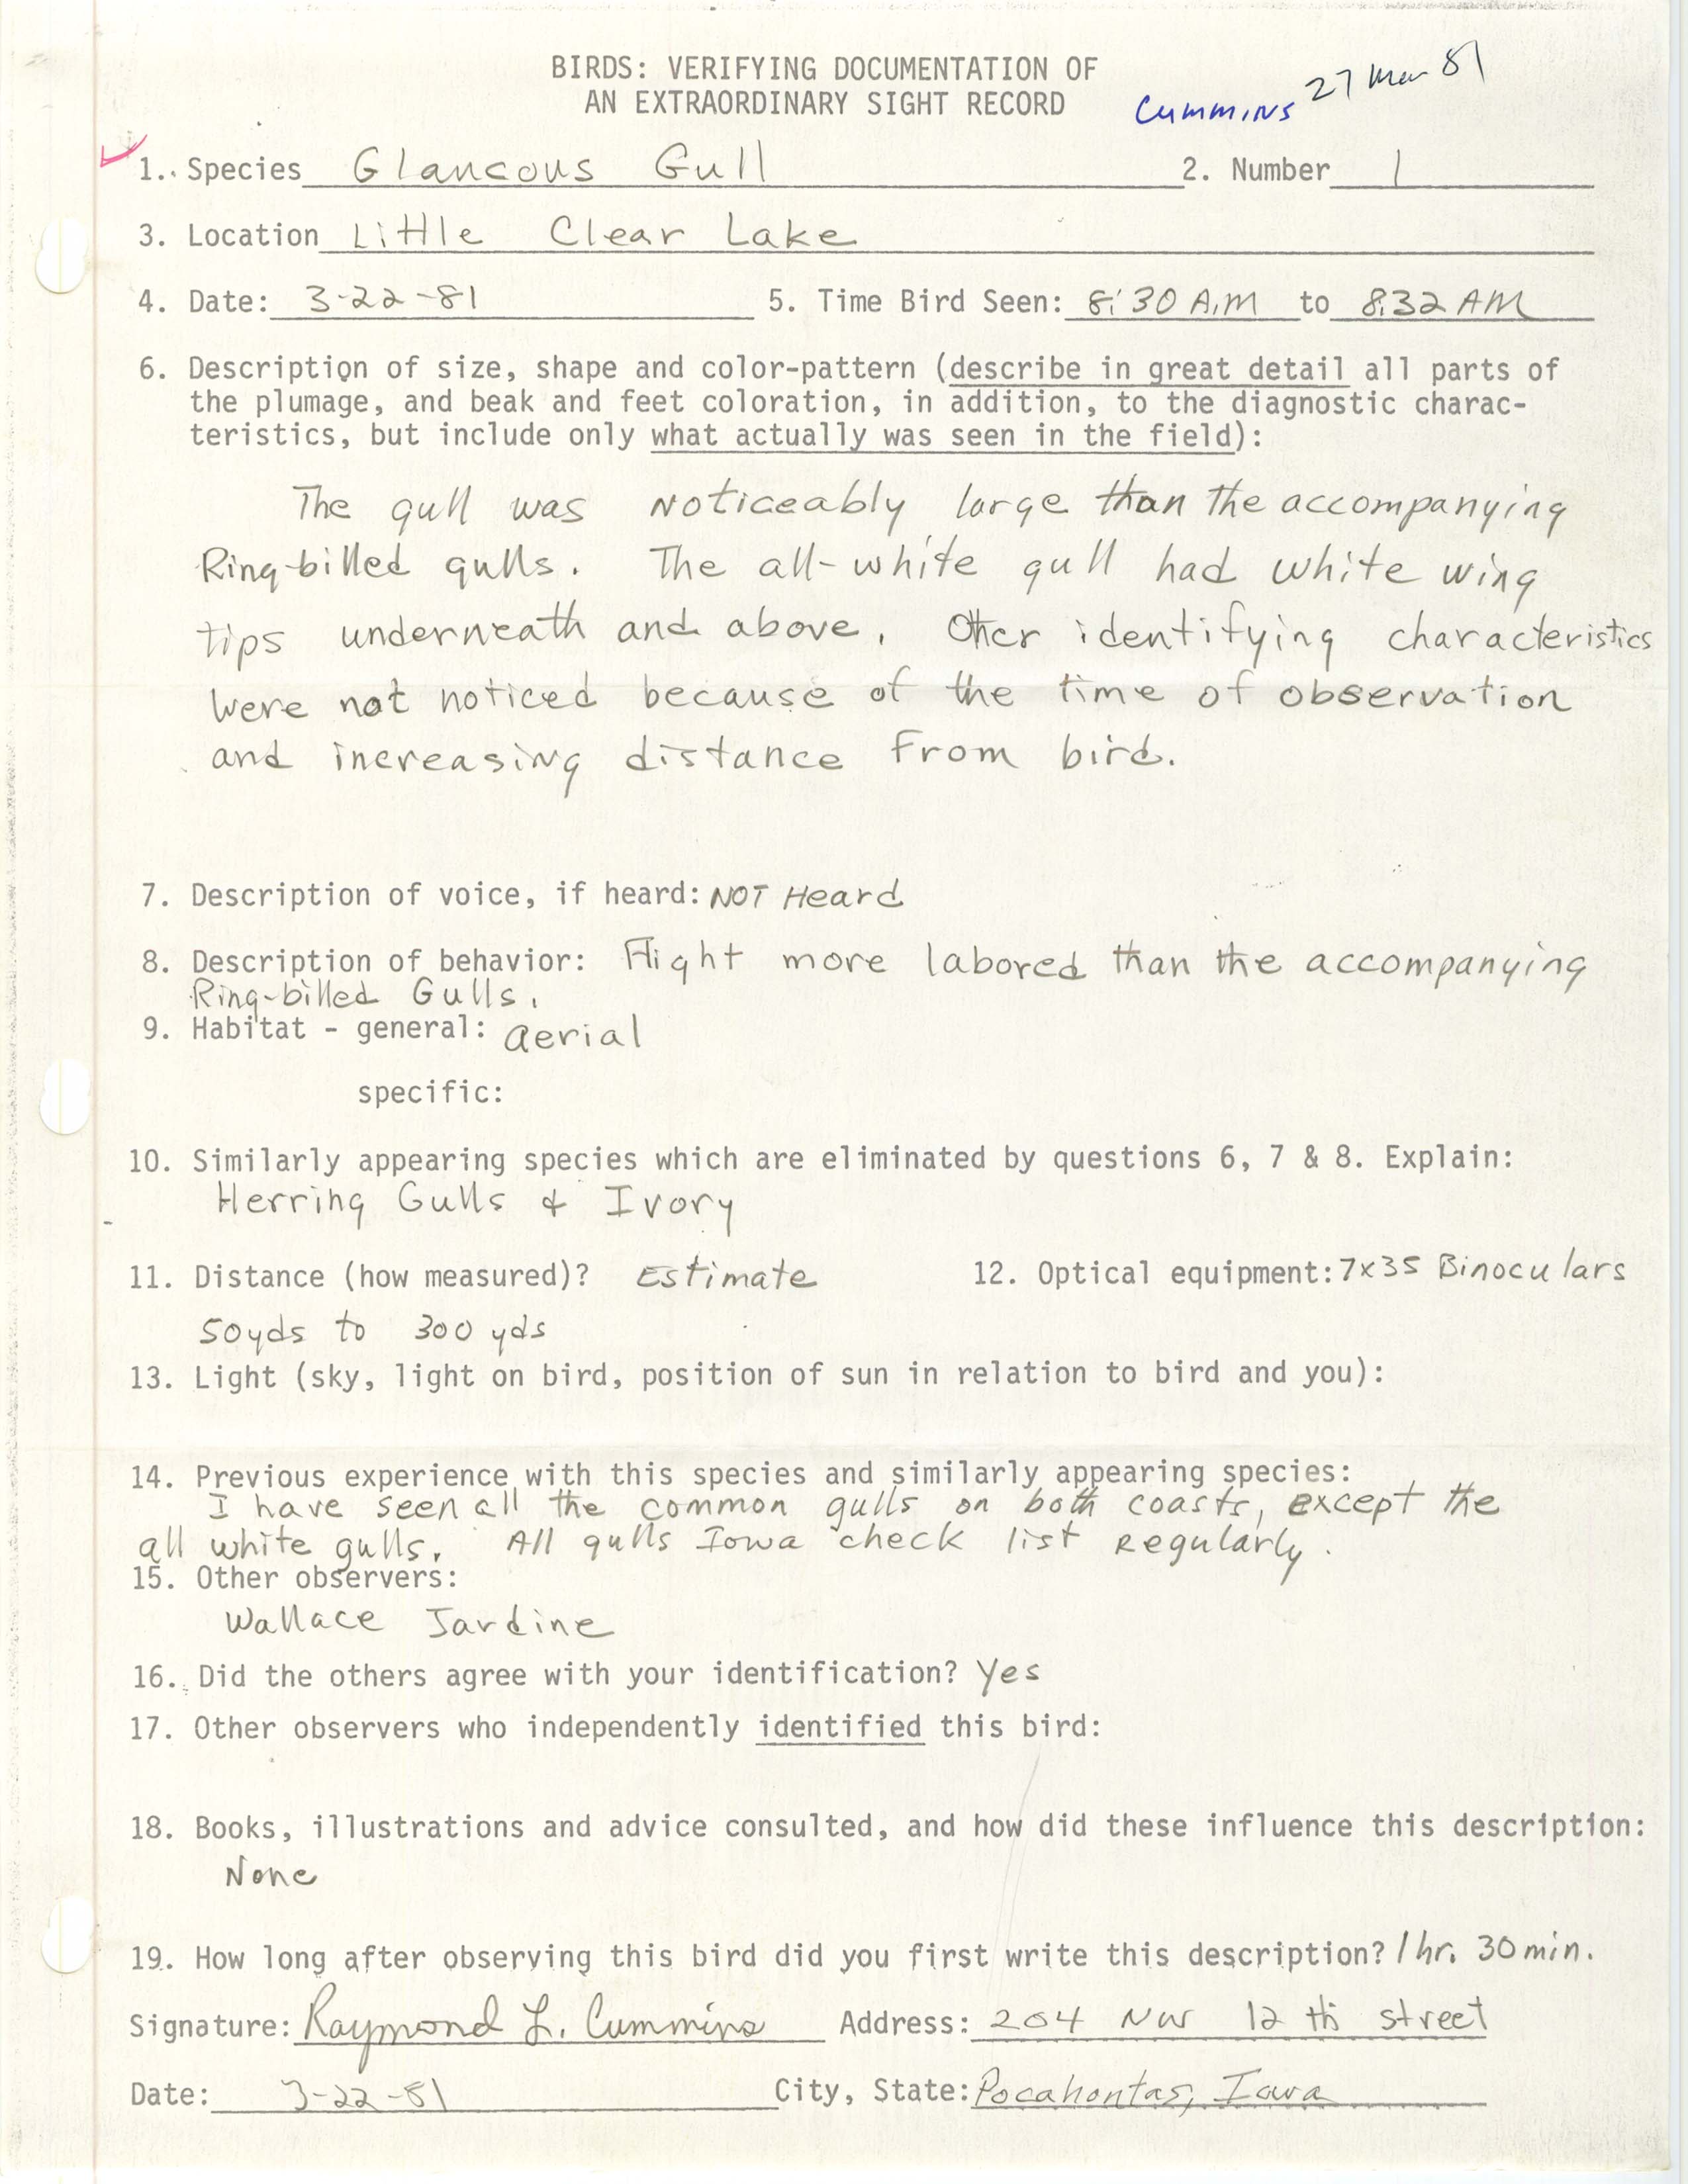 Rare bird documentation form for Glaucous Gull at Little Clear Lake, 1981